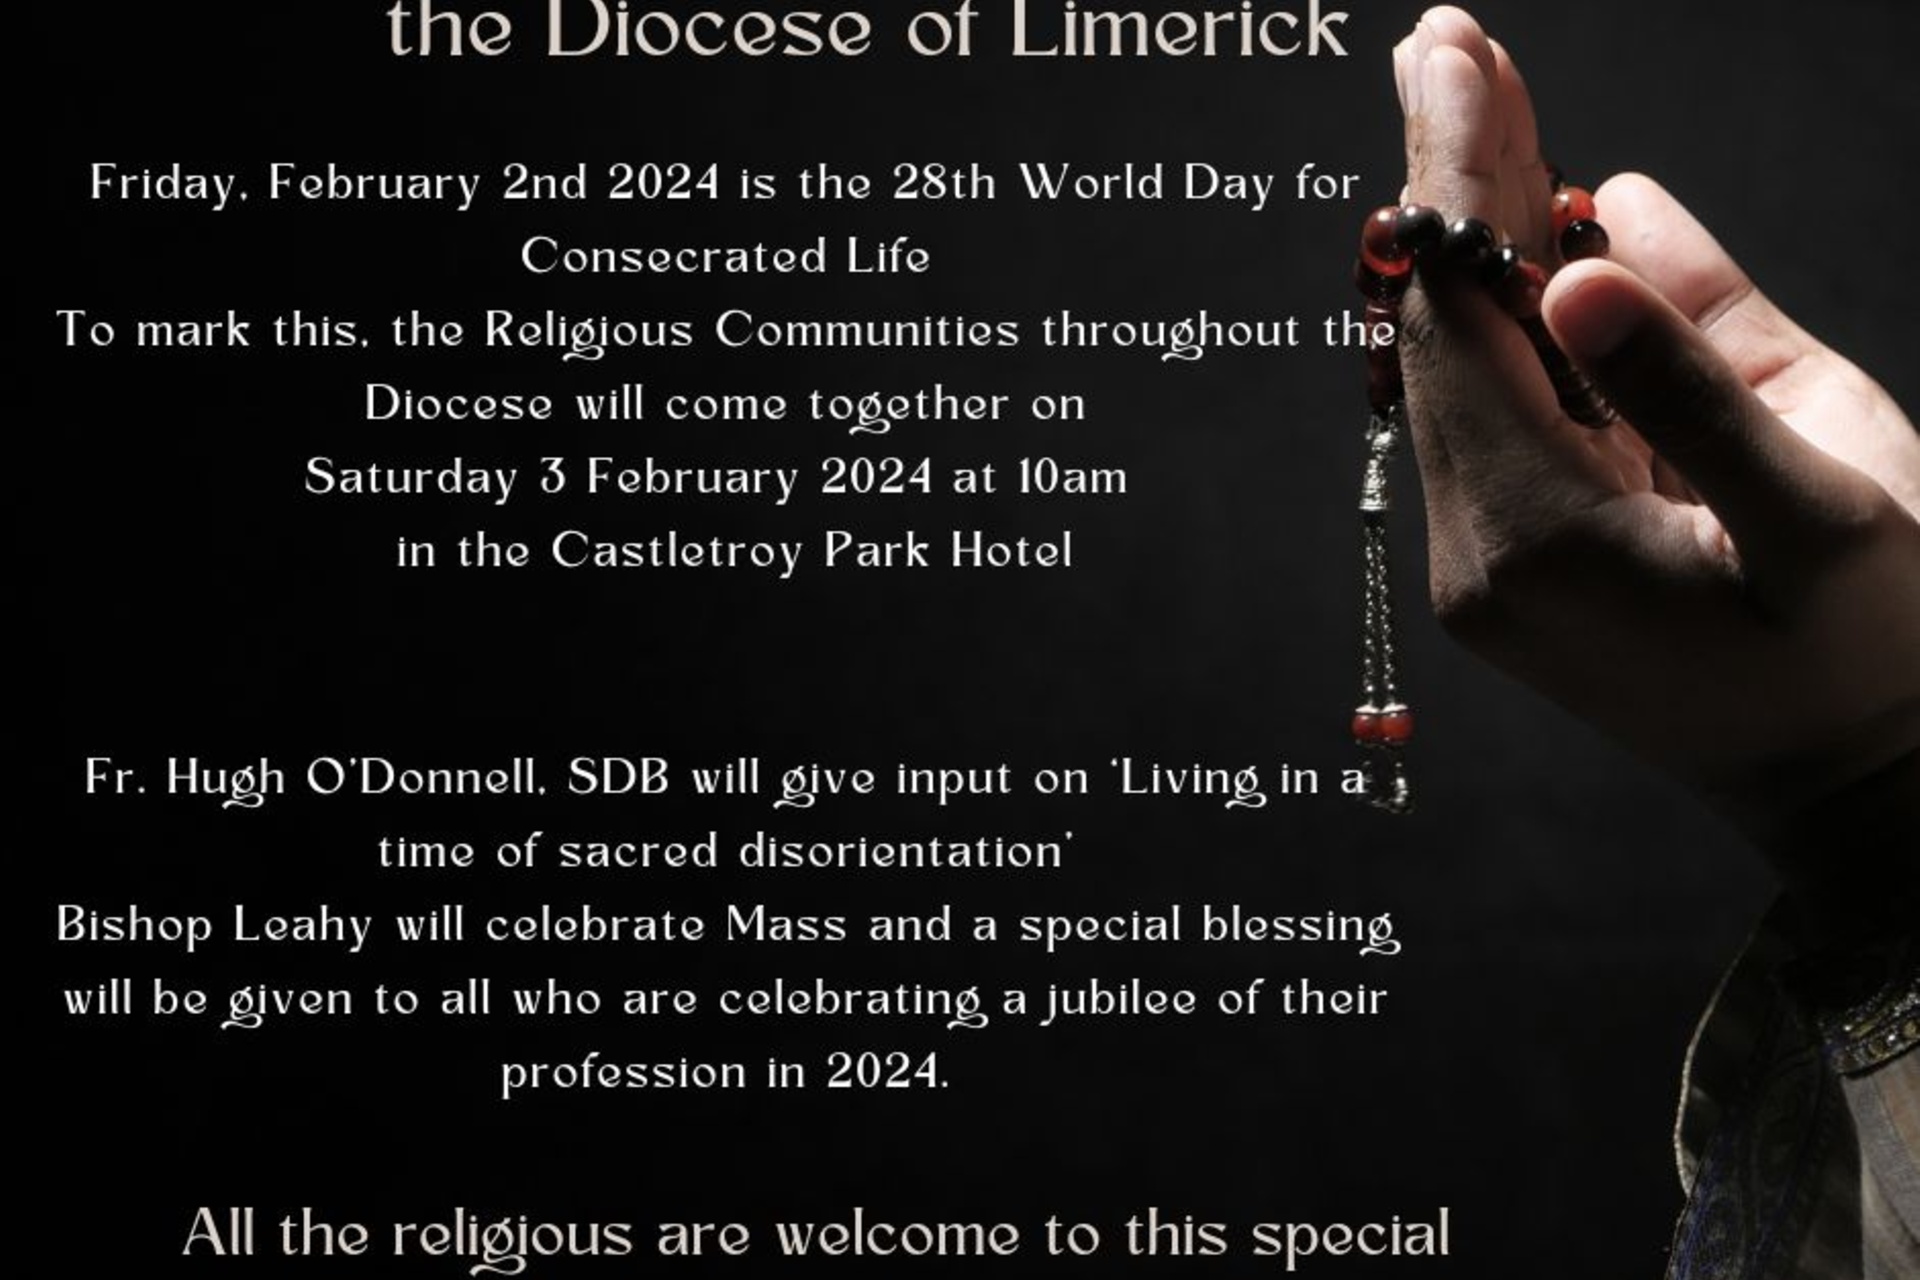 Celebrating Consecrated Life in the Diocese of Limerick